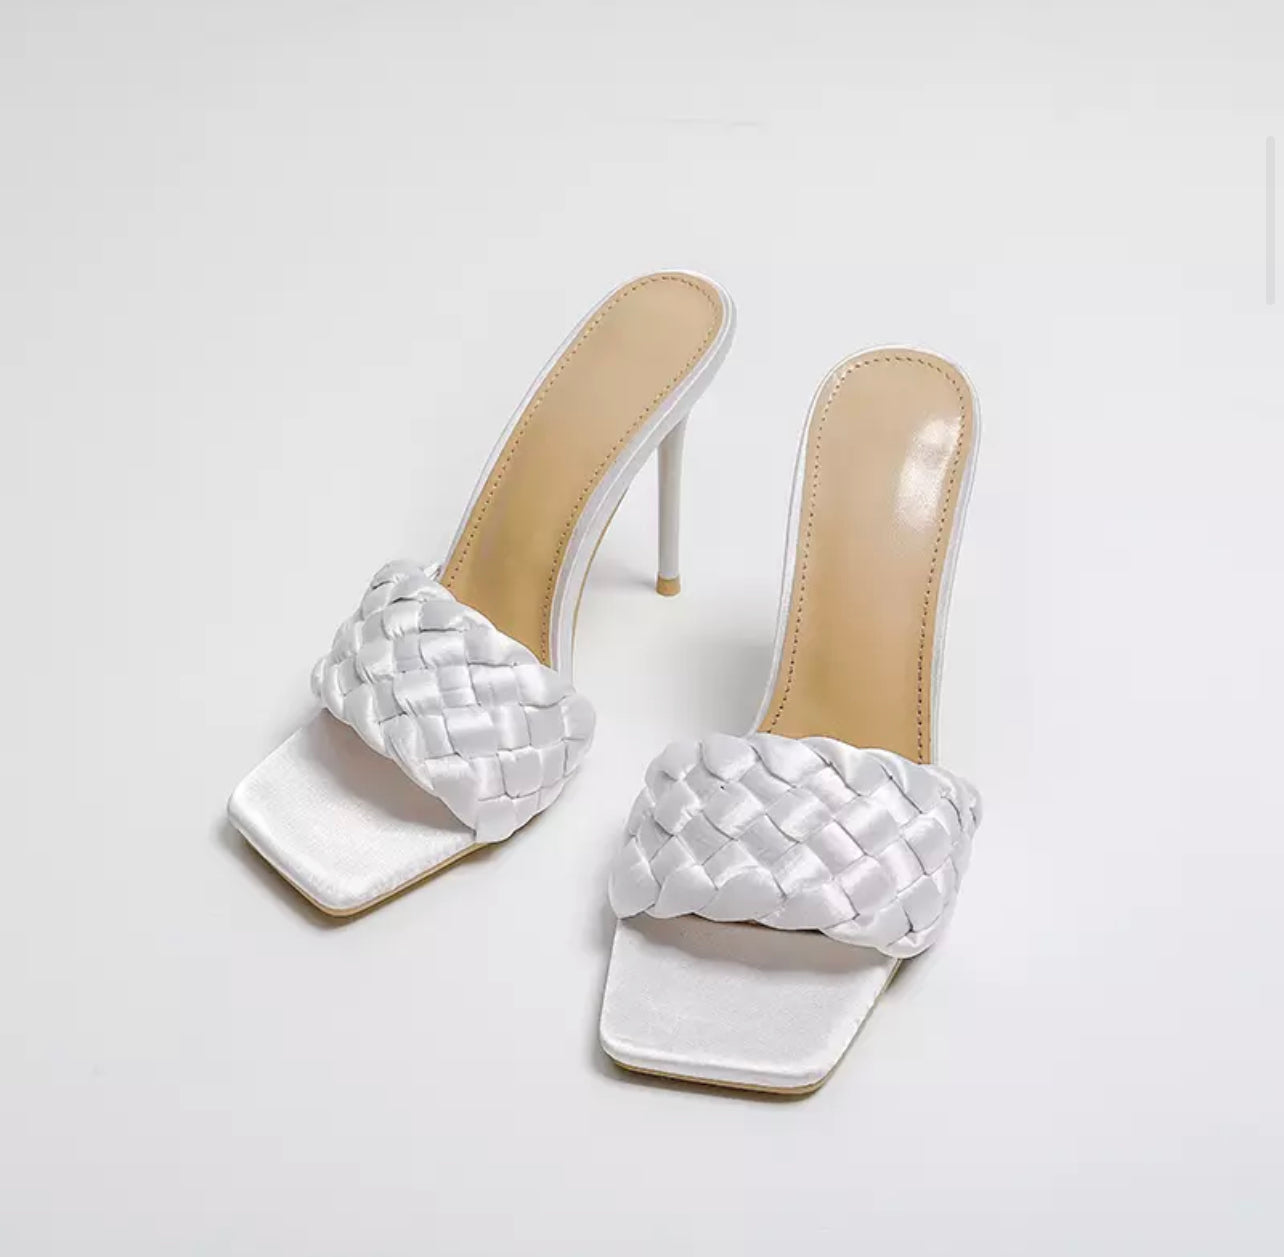 Load image into Gallery viewer, WHITE SATIN BRAIDED SQUARE TOE HIGH HEEL SANDALS
